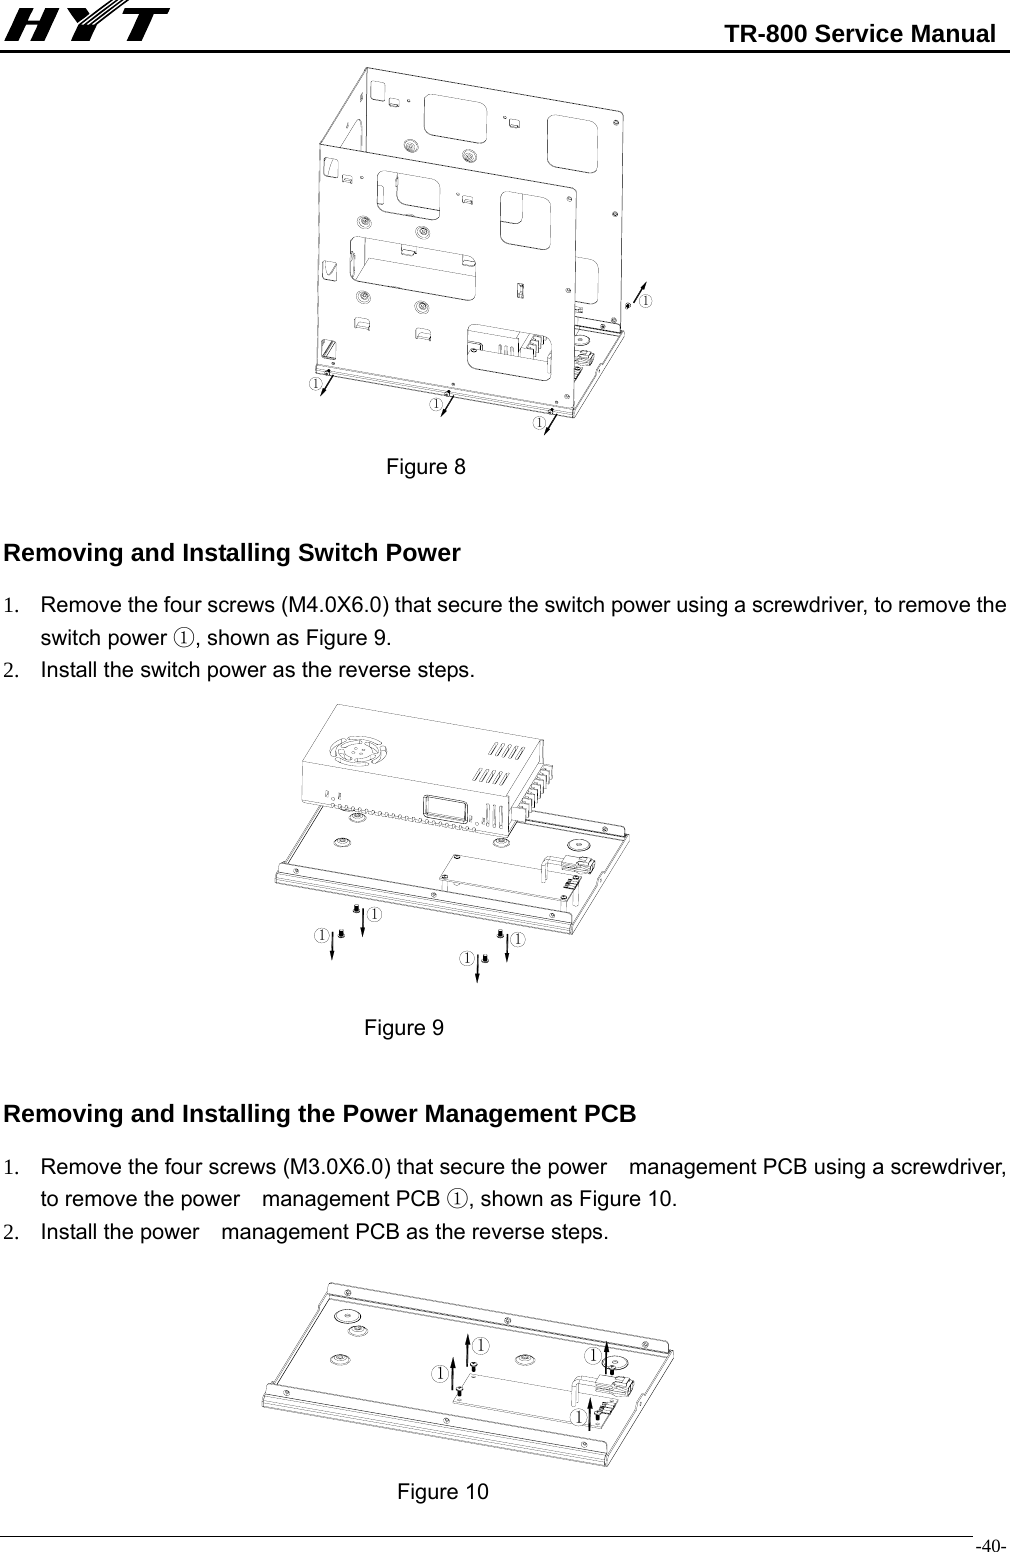                                                            TR-800 Service Manual  -40-                                               Figure 8  Removing and Installing Switch Power 1.  Remove the four screws (M4.0X6.0) that secure the switch power using a screwdriver, to remove the switch power ①, shown as Figure 9. 2.  Install the switch power as the reverse steps.                                            Figure 9  Removing and Installing the Power Management PCB 1.  Remove the four screws (M3.0X6.0) that secure the power    management PCB using a screwdriver, to remove the power    management PCB ①, shown as Figure 10. 2.  Install the power    management PCB as the reverse steps.                                            Figure 10 111111111111